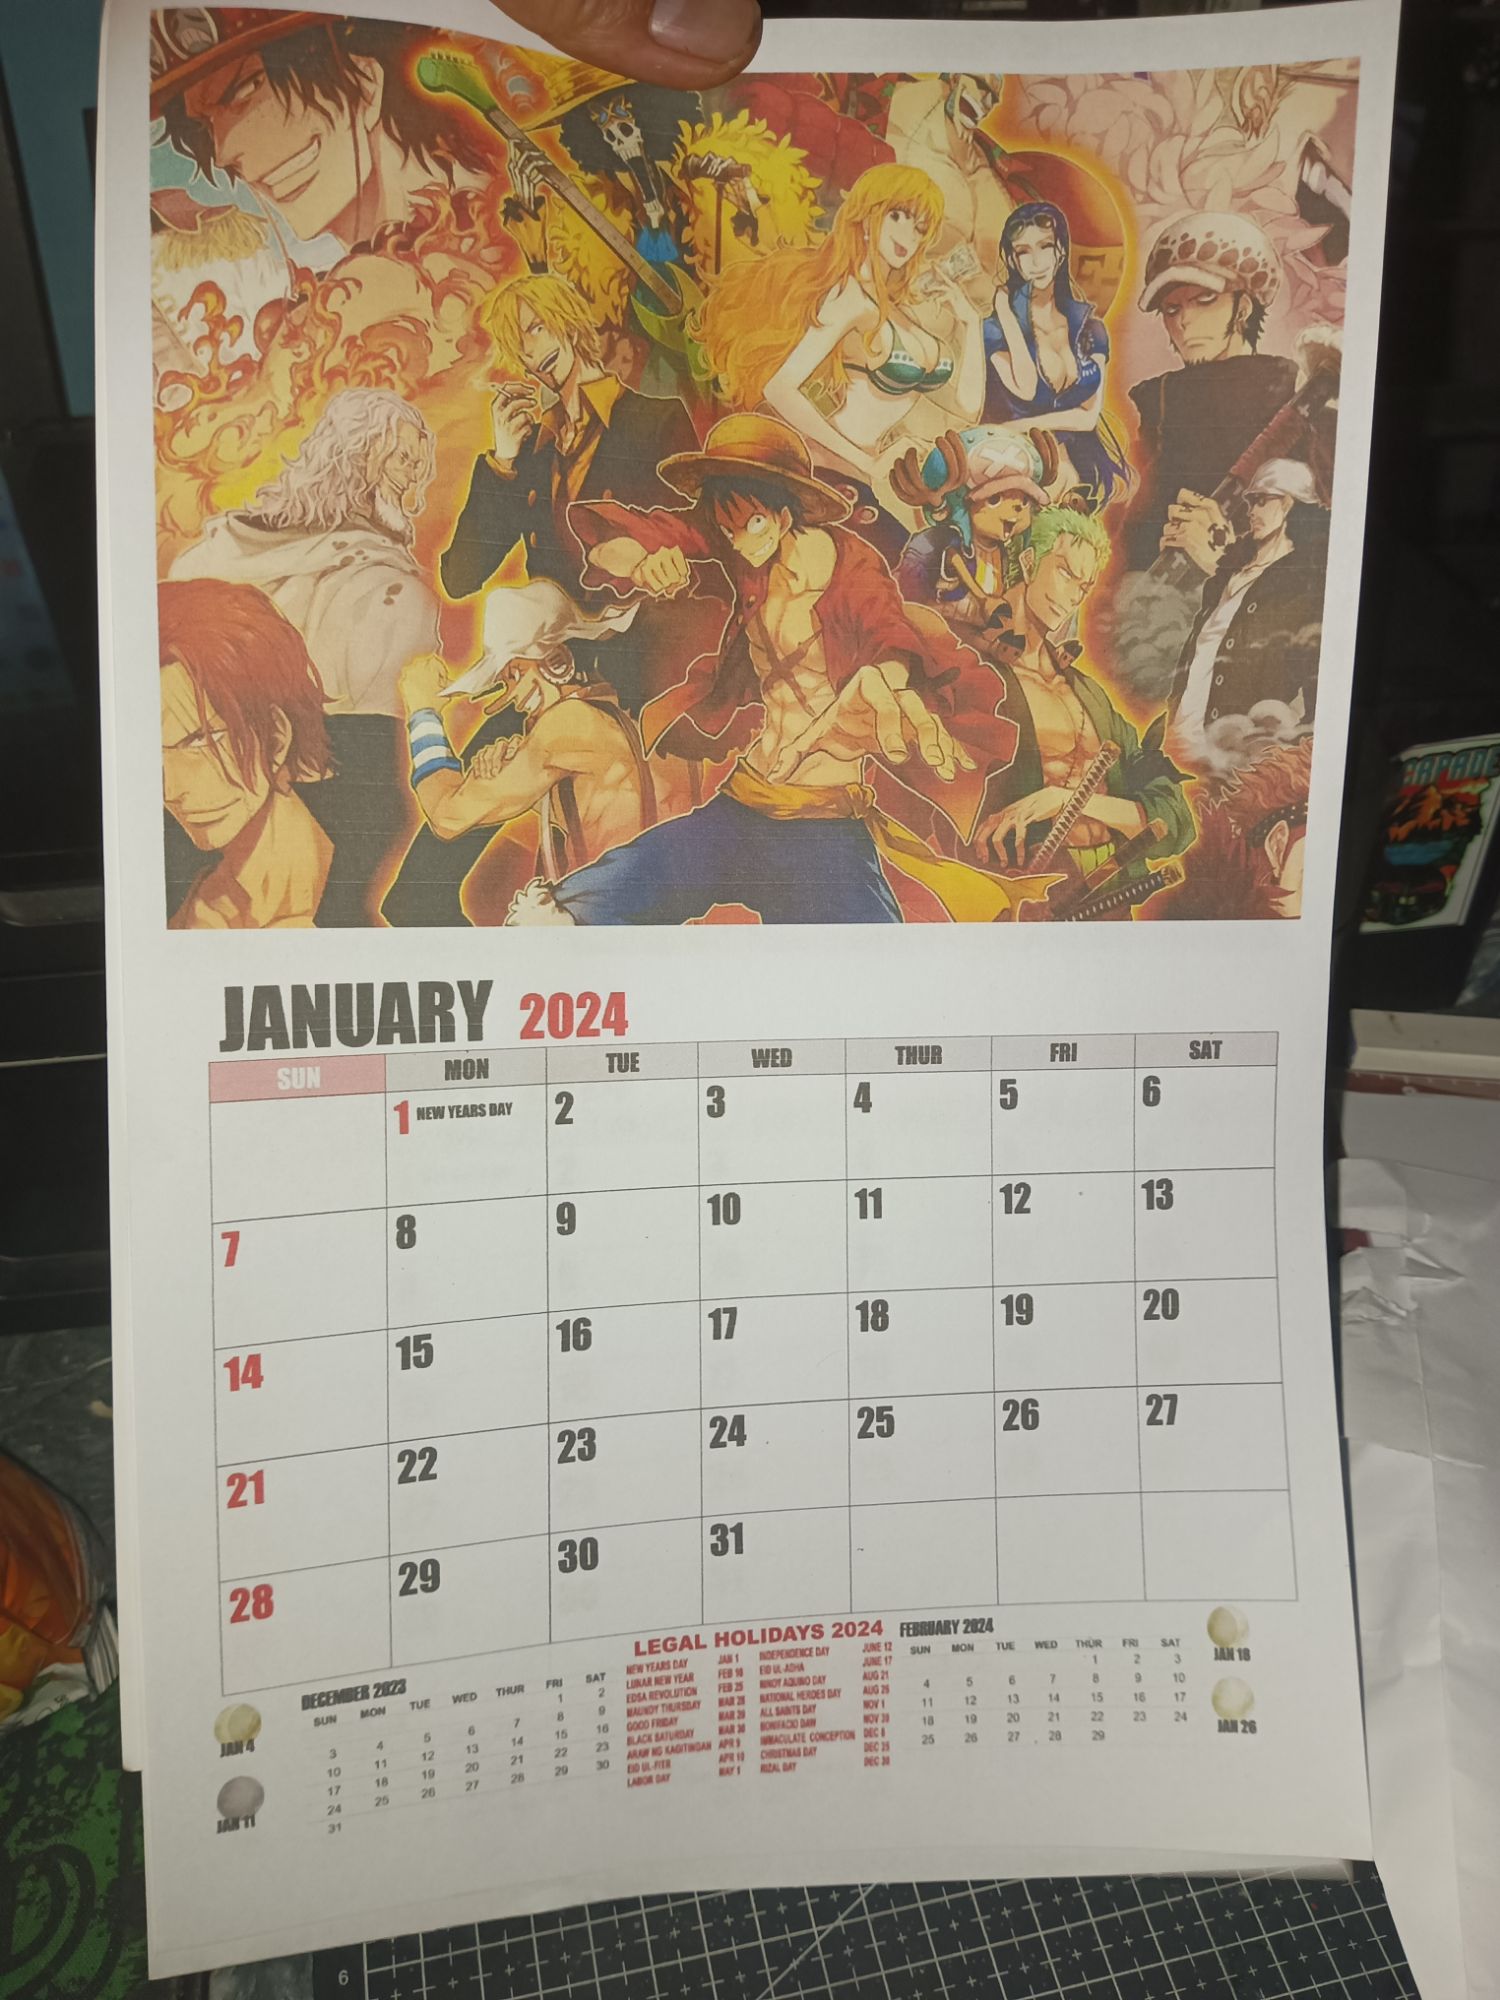 Free Downloadable ANOTHER Anime Calendar 2023 – All About Anime and Manga-demhanvico.com.vn